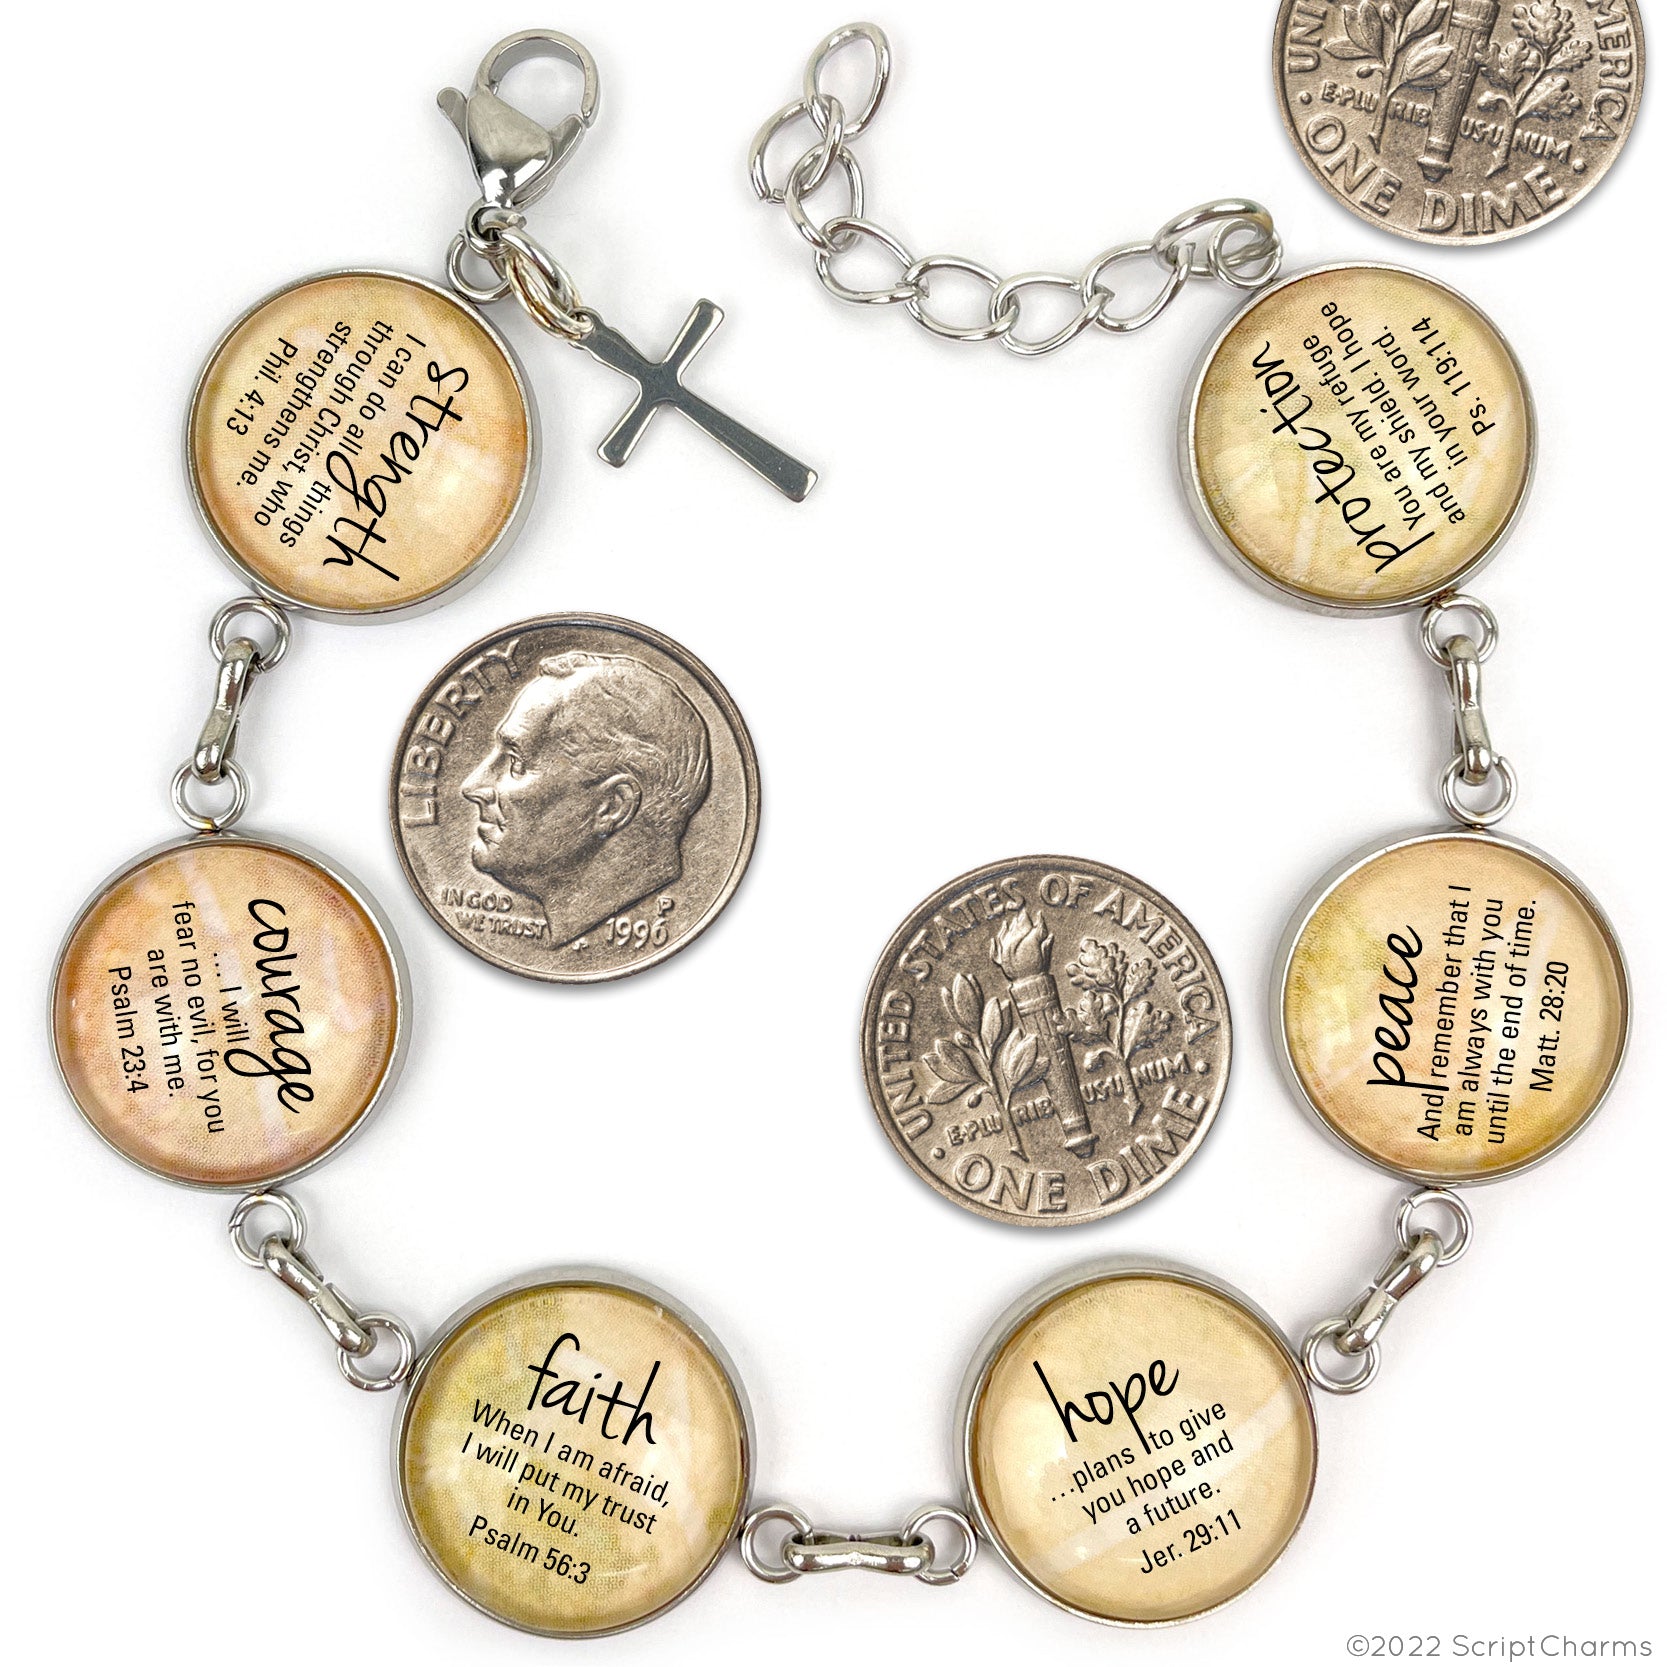 Scripture Charm Bracelet - Words of Hope & Encouragement, Strength, Courage, Faith, Hope - Handcrafted with Glass Charms and Dangling Charm Options - Bracelets - Bijou Her -  -  - 